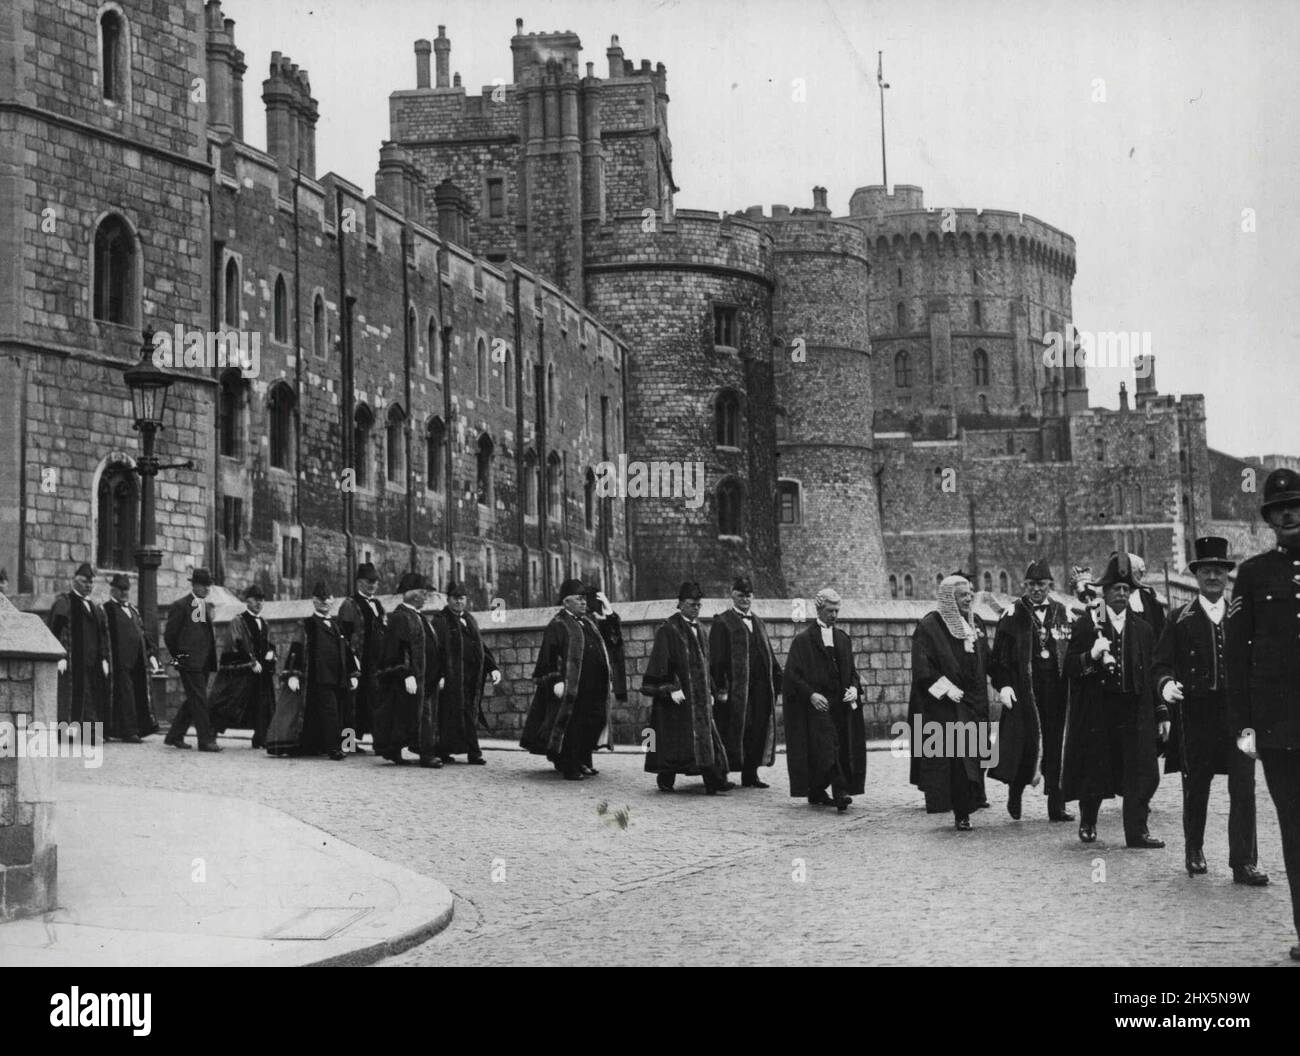 The mayor and corporation of Windsor And the dean and Canons of St. George's chapel Windsor Castle presented addresses to H.M. the king at the castle. This was the King's first function of an official nature at Windsor castle since his accession. The Mayor and Corporation in procession leaving Windsor Castle after the ceremony. January 15, 1936. (Photo by Sport & General Press Agency Limited). Stock Photo